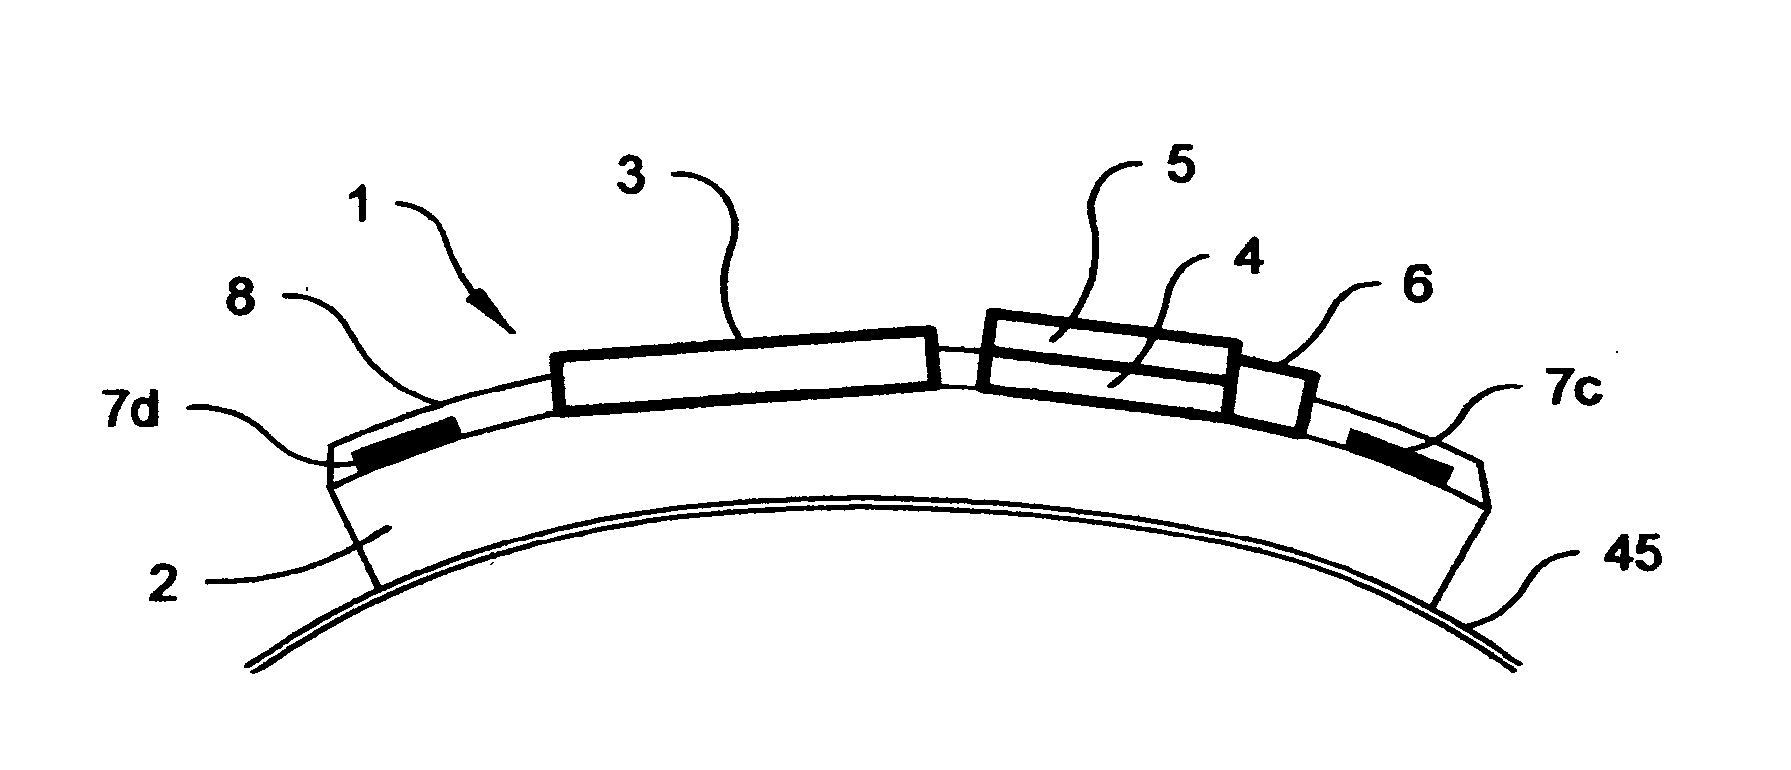 Flexible actuator with integral control circuitry and sensors